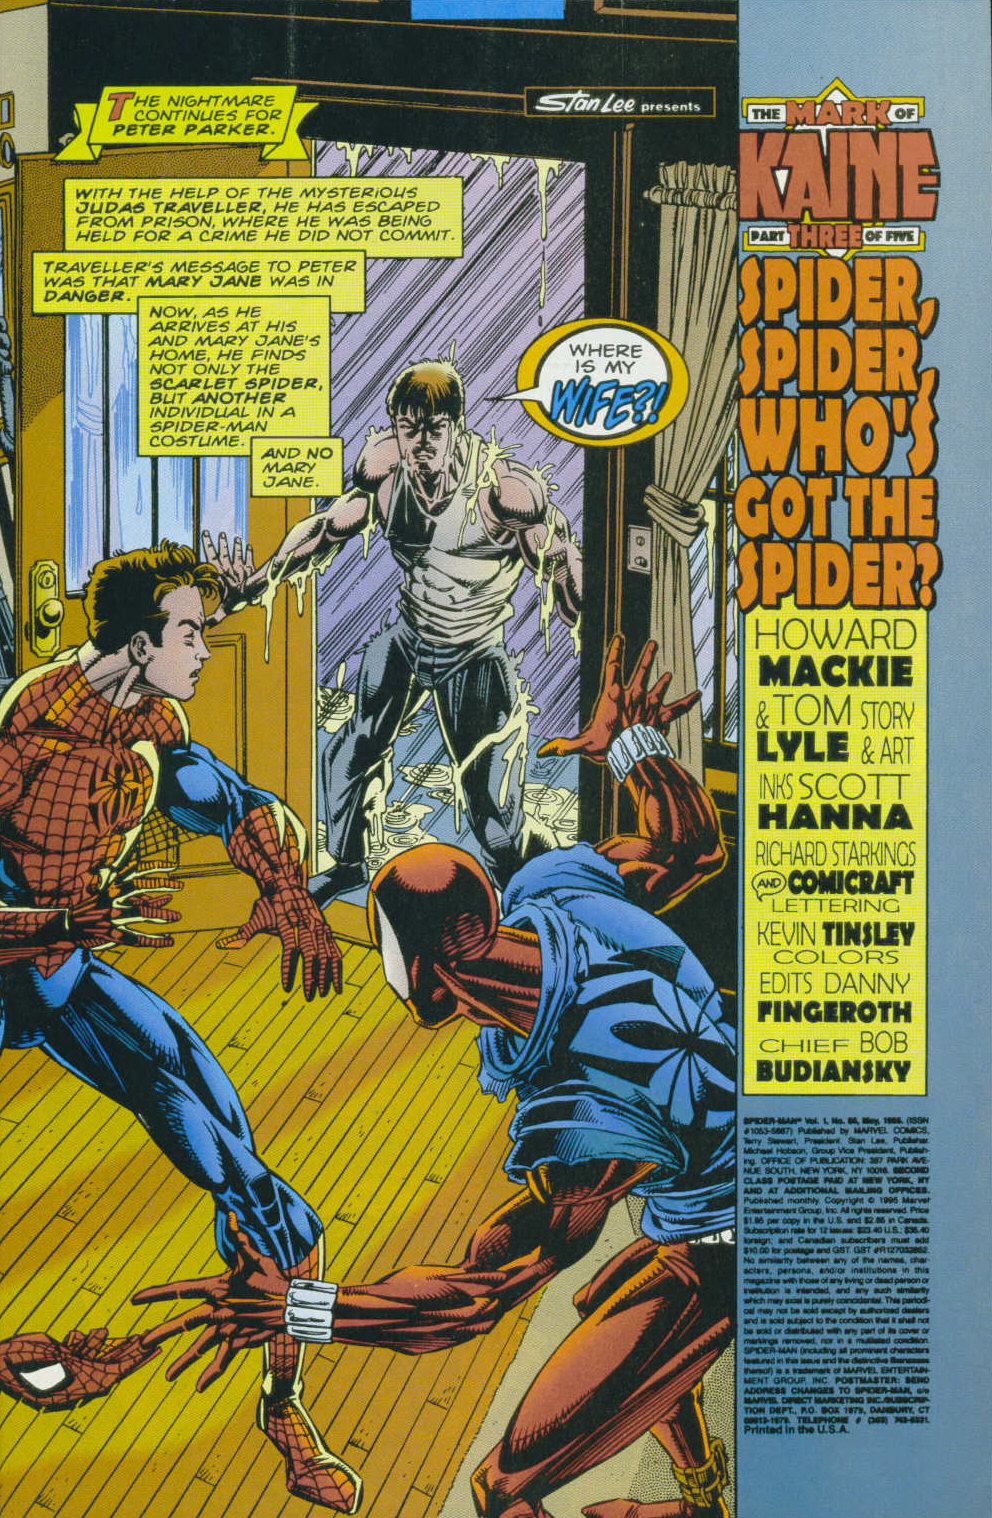 <{ $series->title }} issue 58 - Spider, Spider, Who's Got The Spider - Page 2